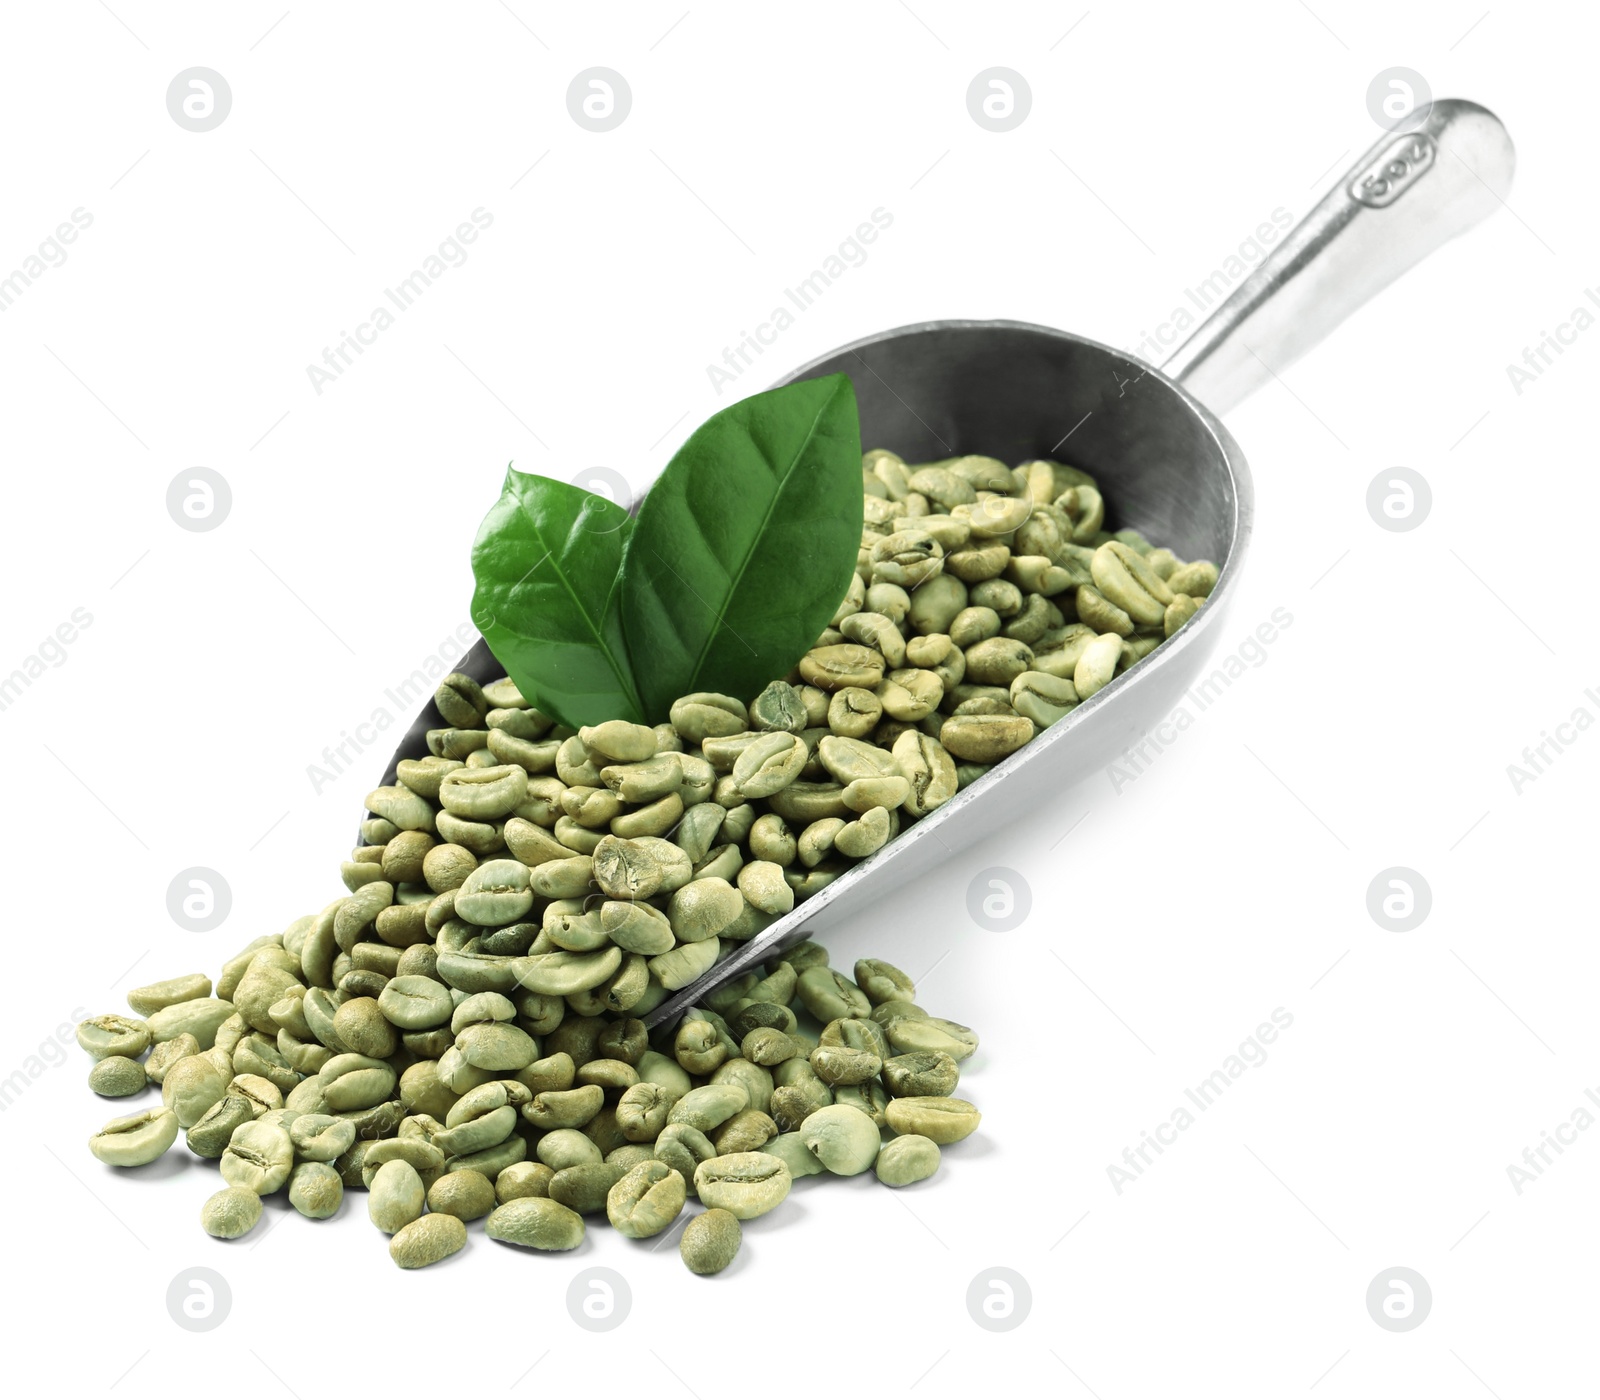 Photo of Pile of green coffee beans, leaves and scoop on white background